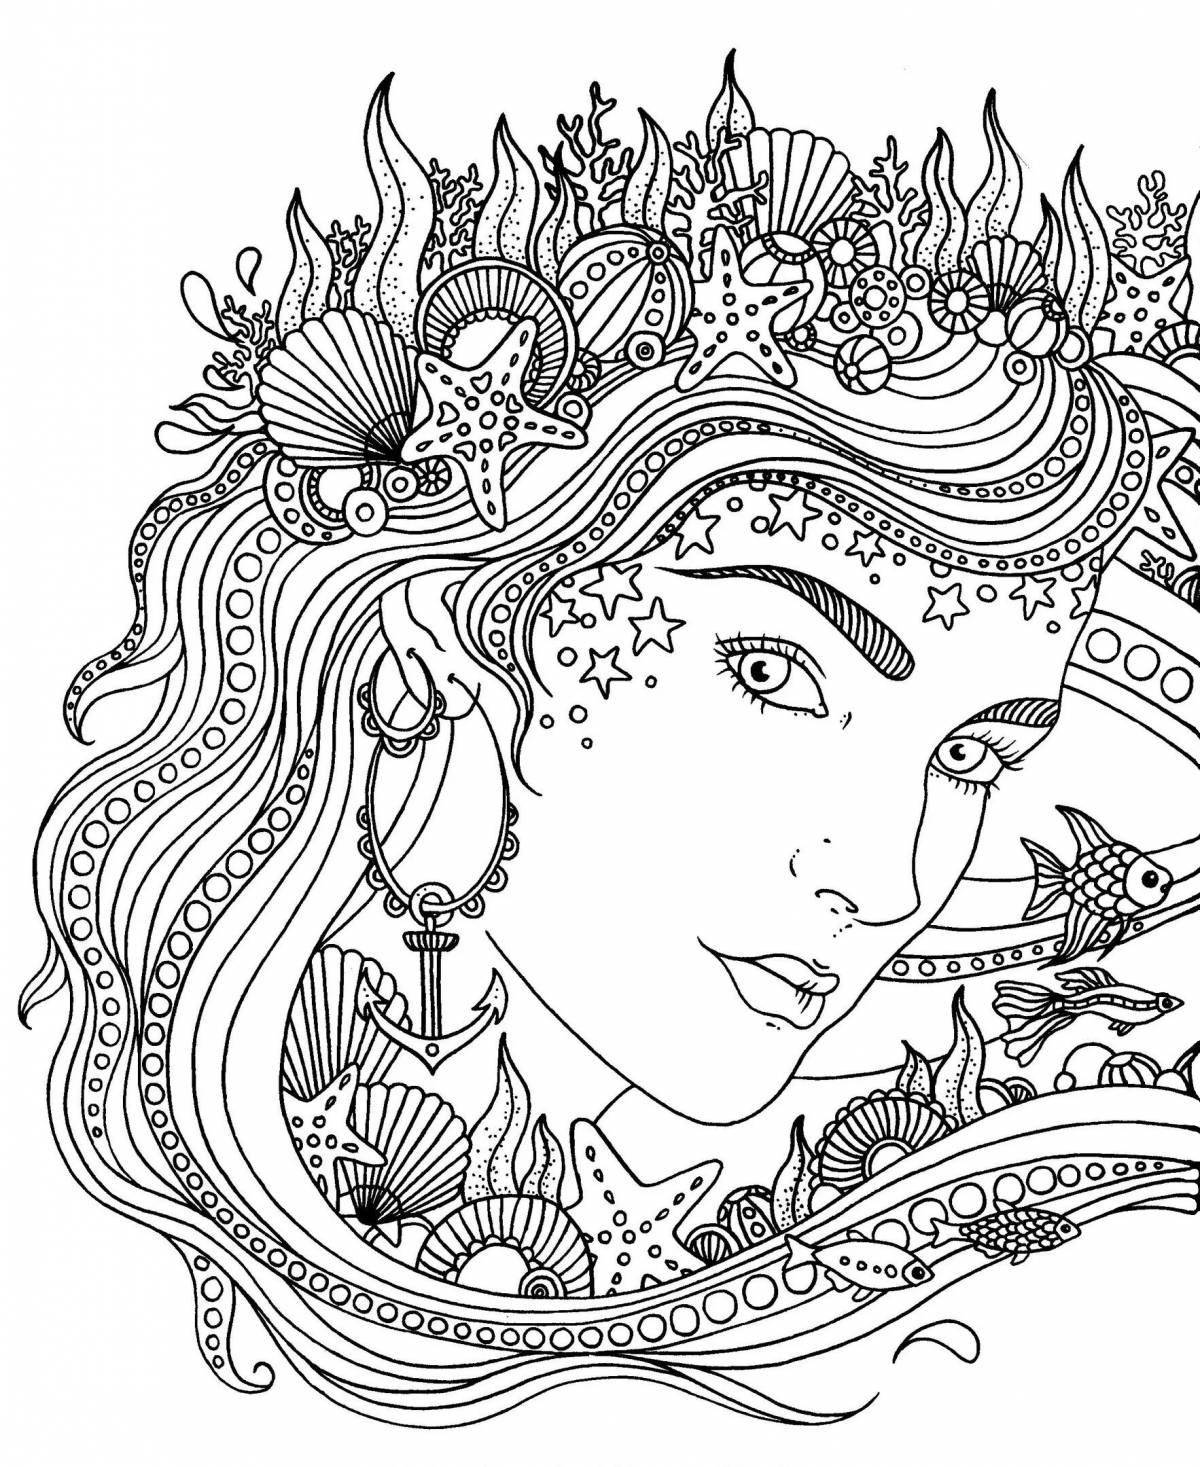 Great coloring book for adult girls